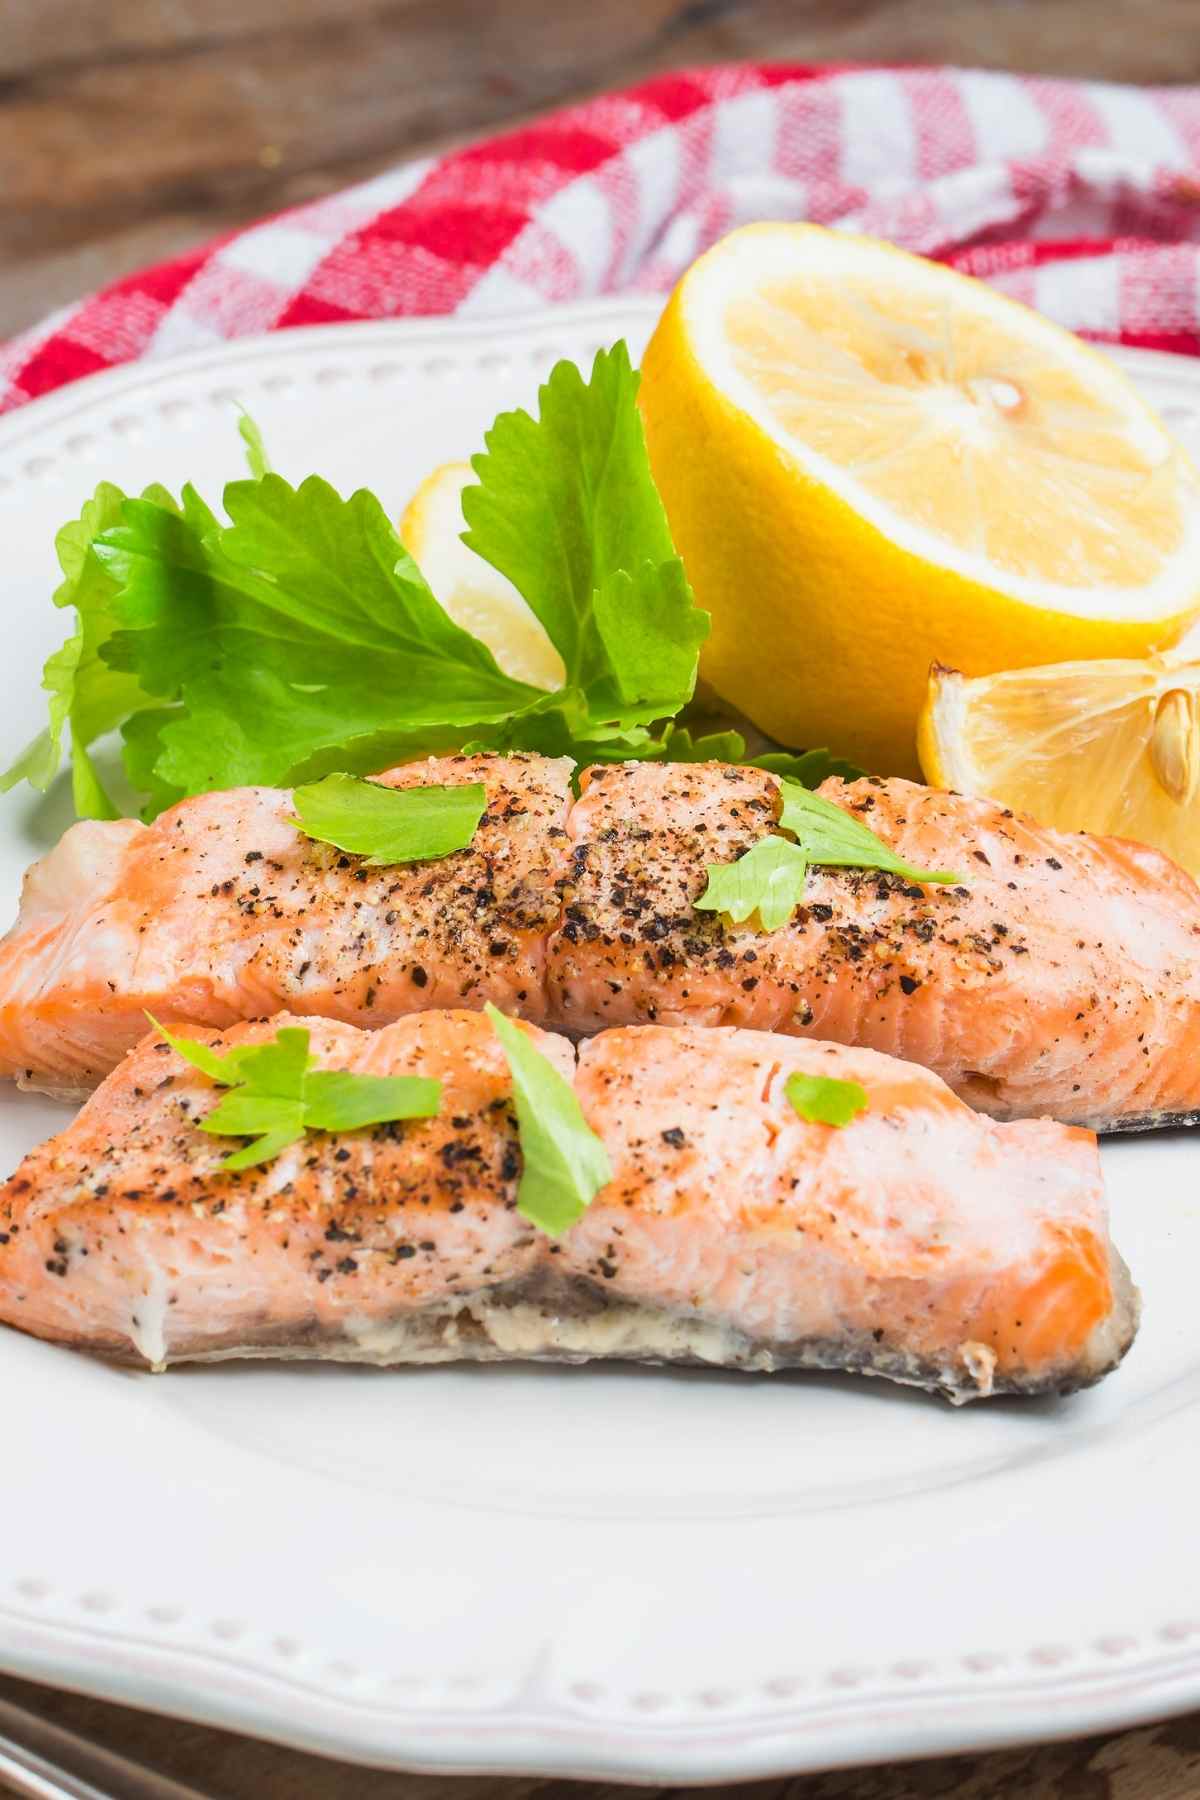 If you’re short on time, this microwave salmon is the perfect solution. It takes less than 10 minutes to make, and you’ll be more than pleased with the results!